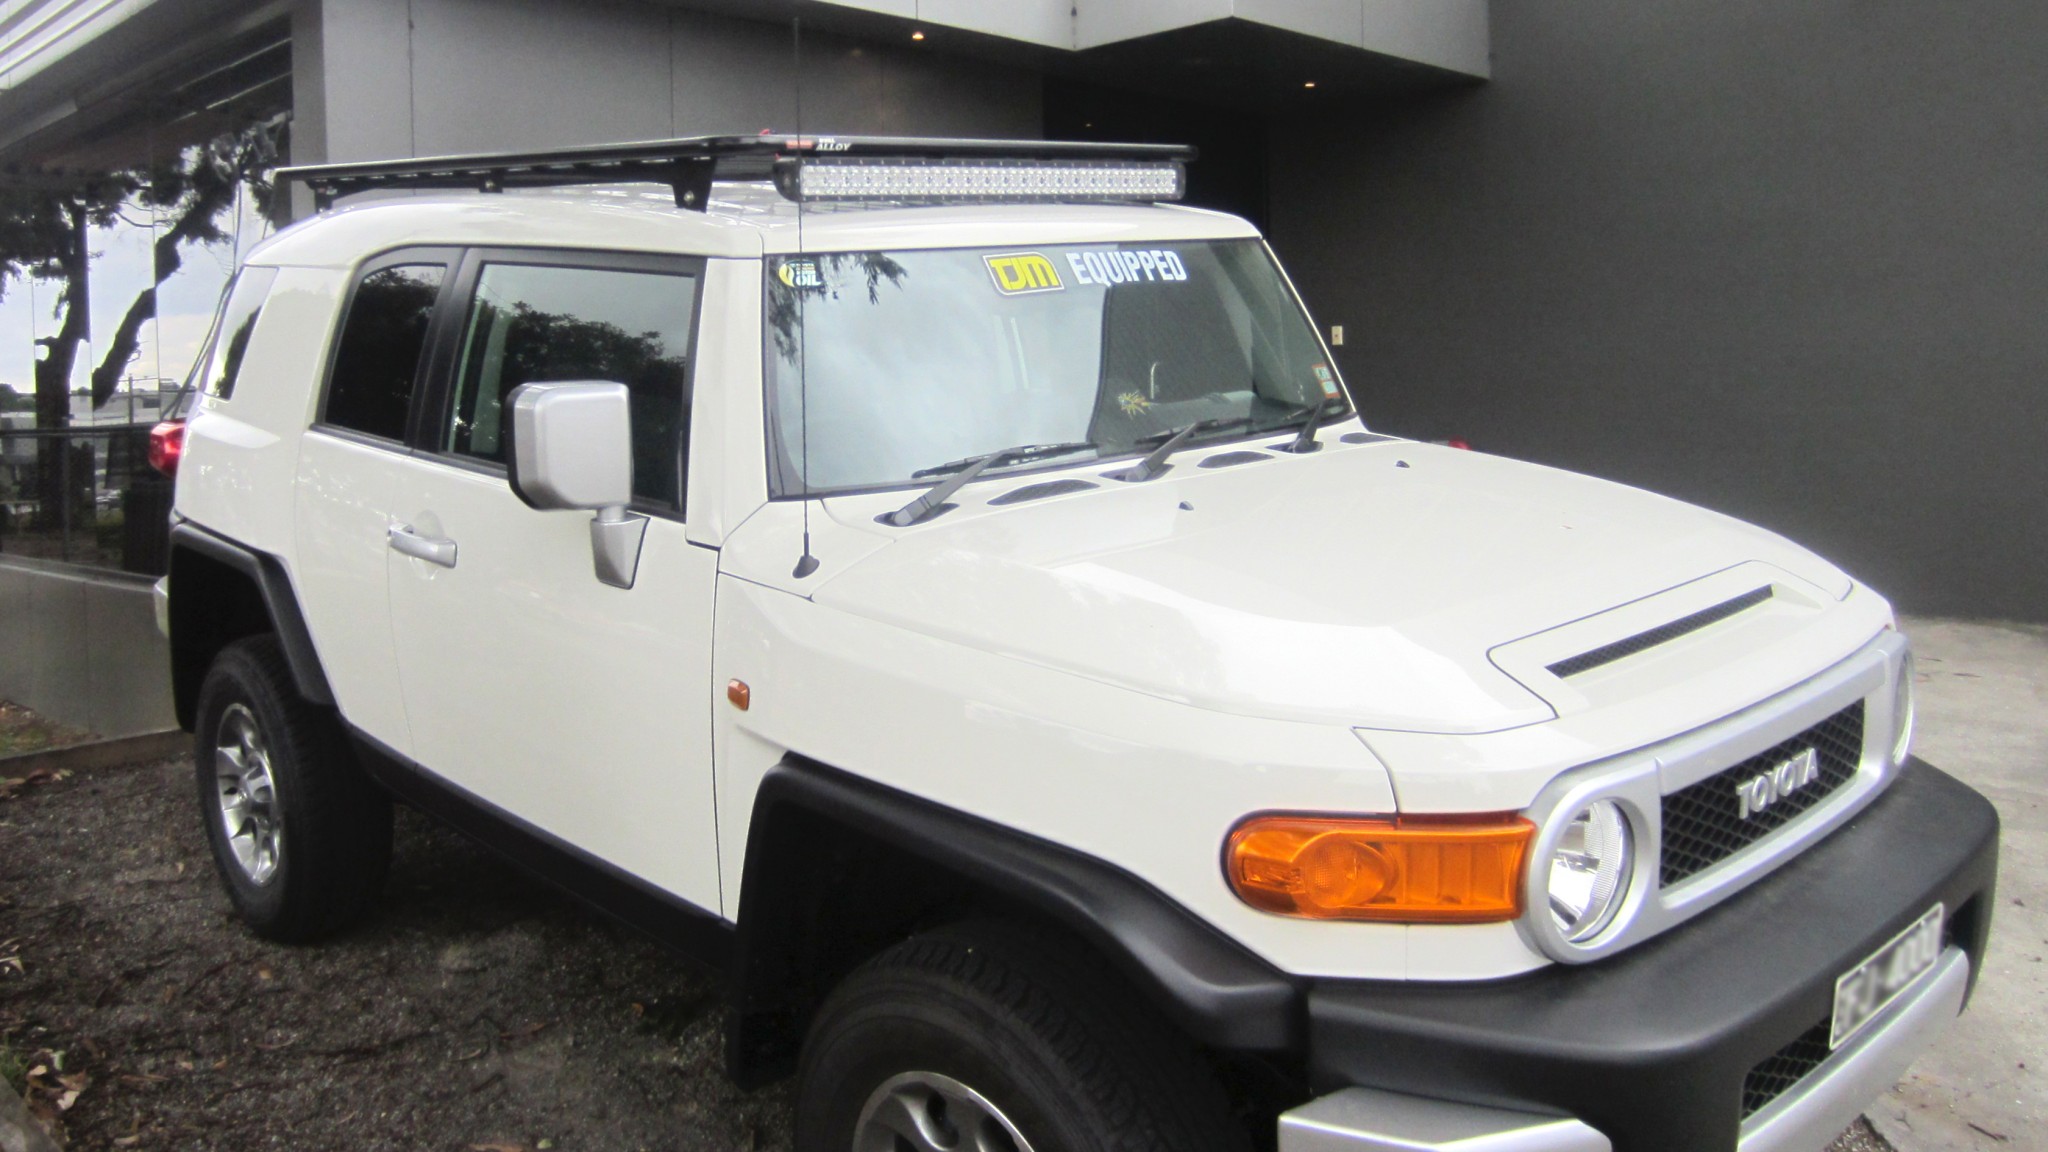 Toyota FJ Cruiser with Tradesman Oval Alloy flat-deck roof rack and LED light bar installed